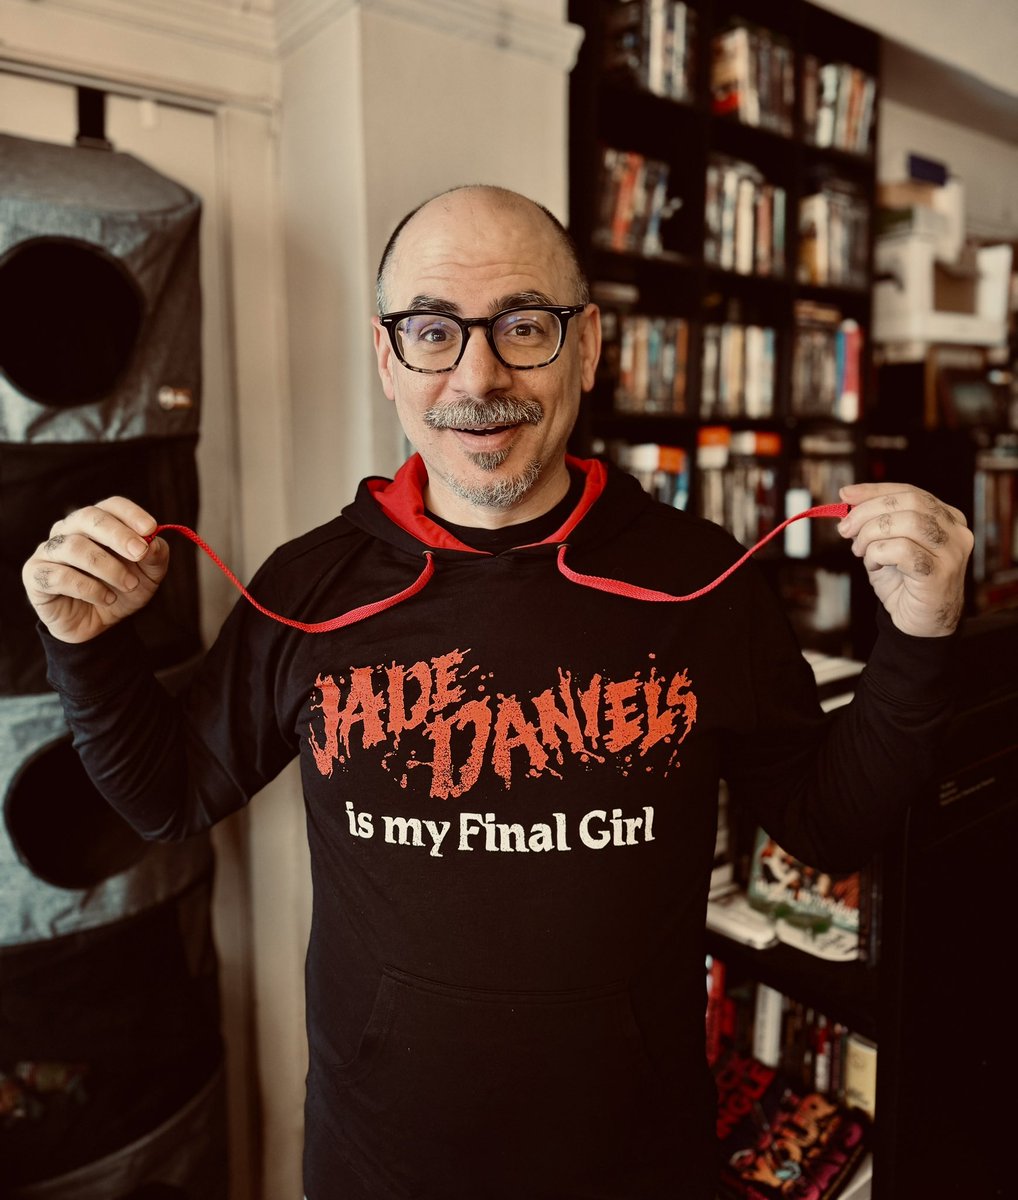 As a compulsive hoodie wearer, this hoodie is the greatest hoodie of all the hoodies 🤘🏻 Thanks so much to my buddy @iGregGreene for hooking me up 🔥❤️🔥 You are the best, sir! #angelofindianlake #jadedanielsismyfinalgirl